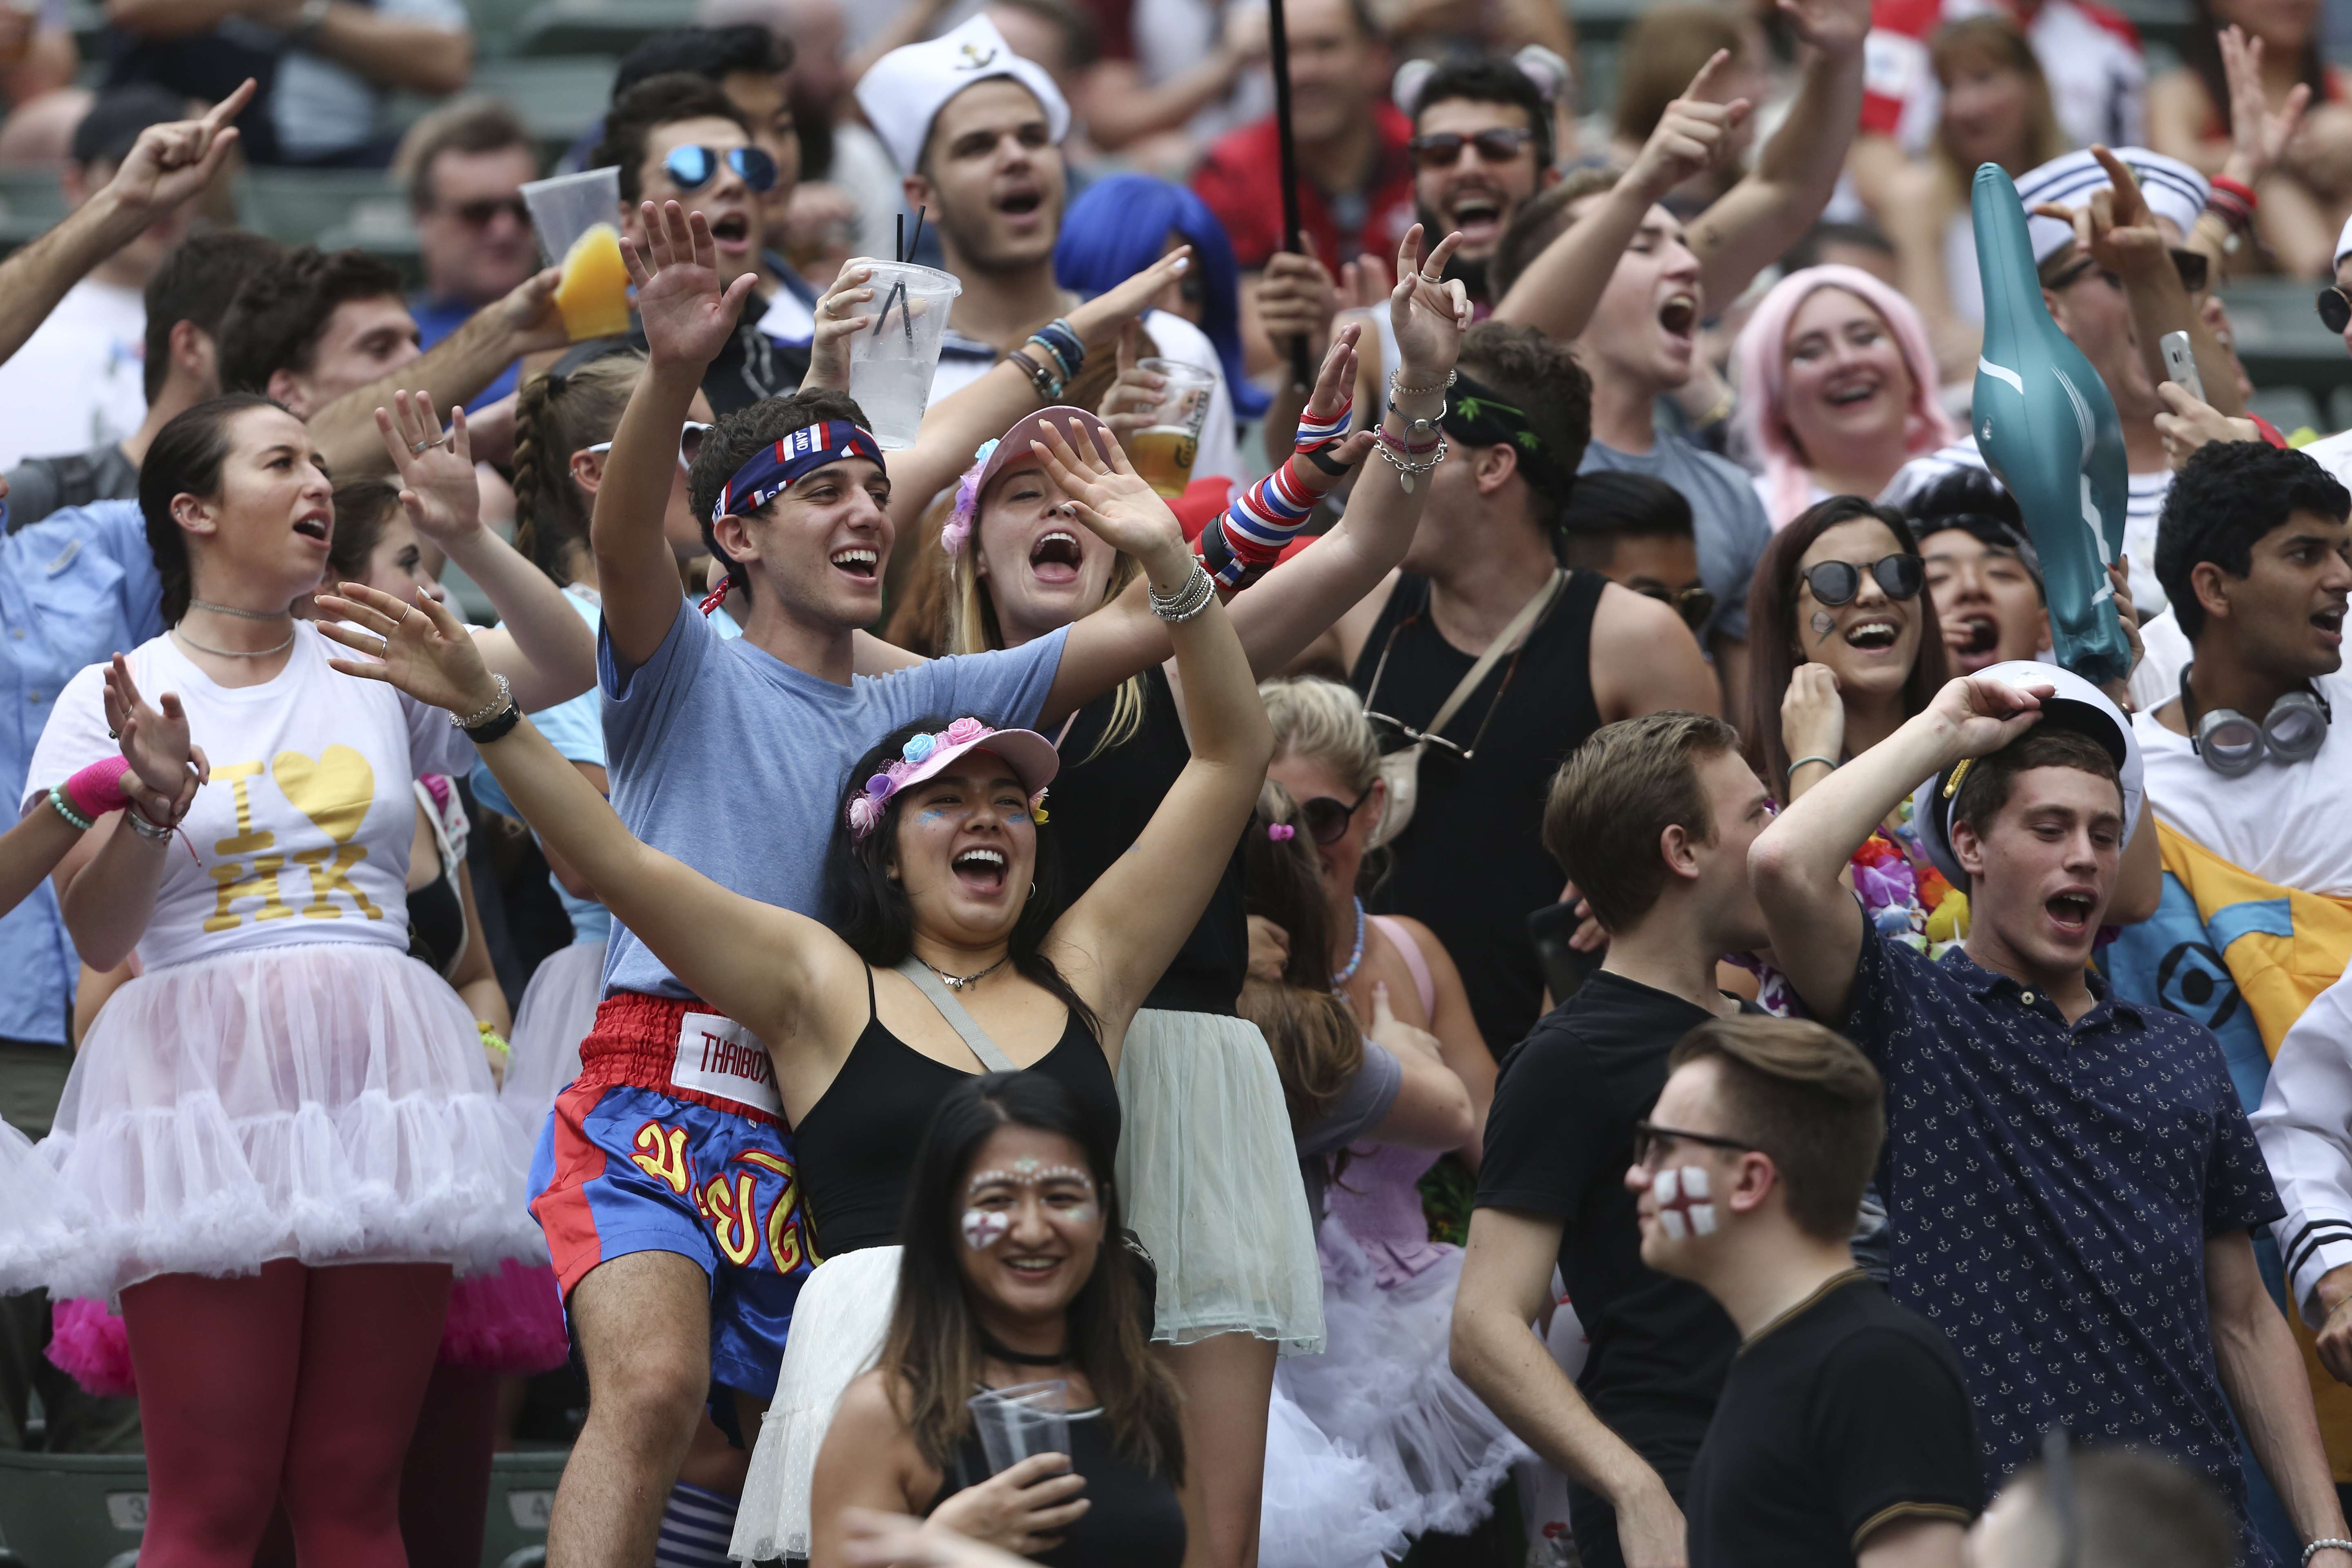 Sevens exuberance takes hold in the south stand of the Hong Kong Stadium. Photo: Jonathan Wong